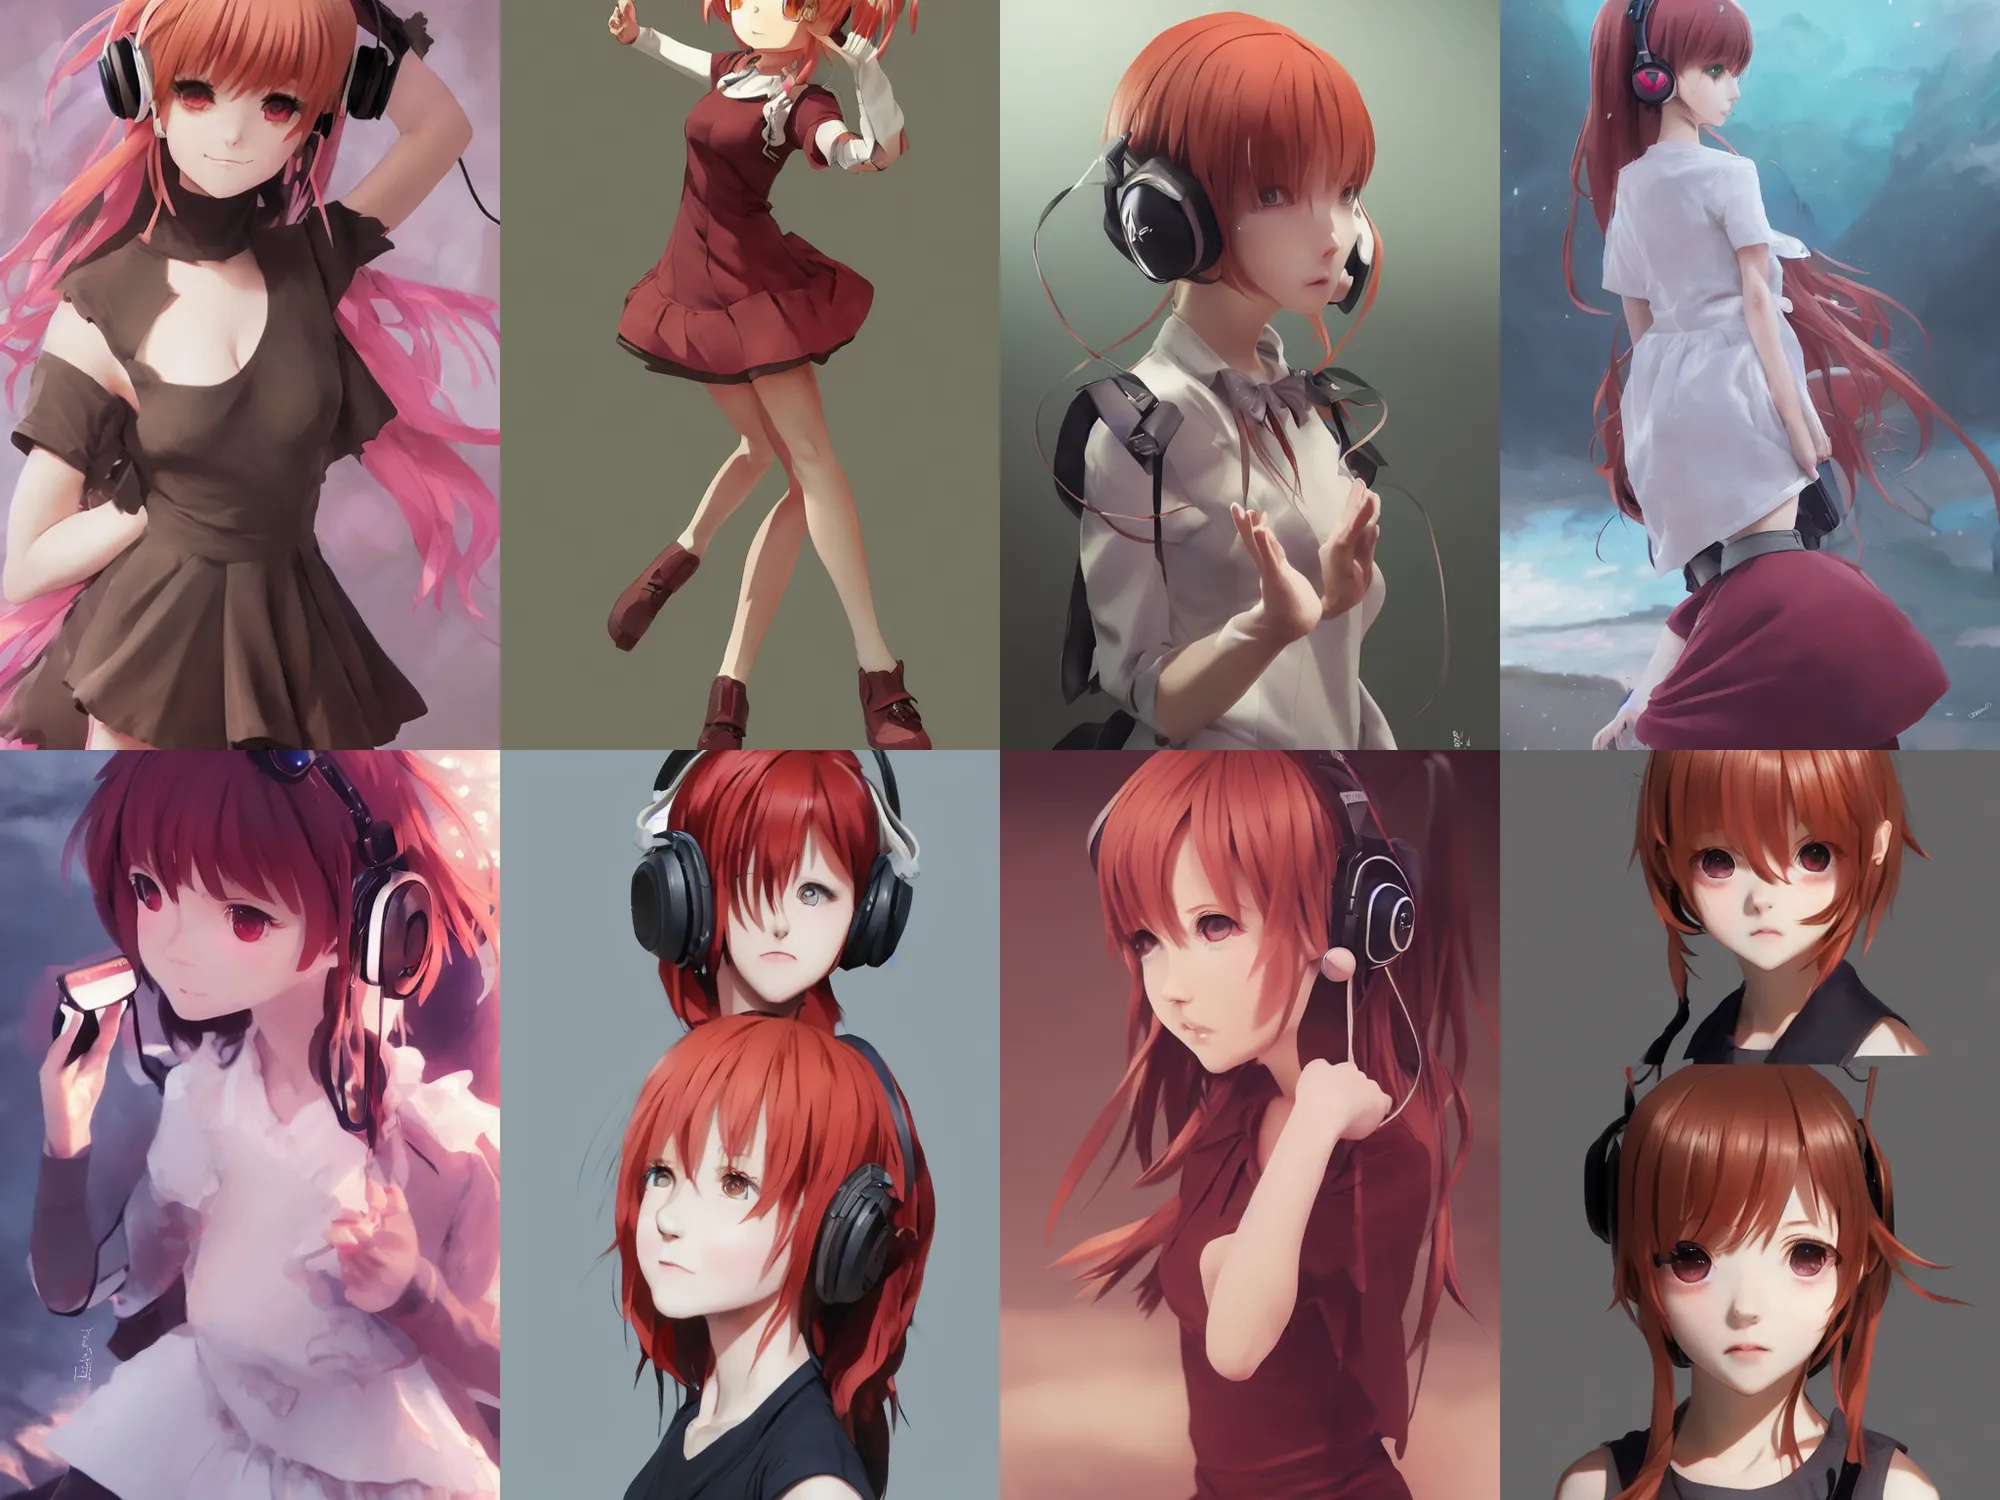 6,881 Red Haired Girl Anime Images, Stock Photos, 3D objects, & Vectors